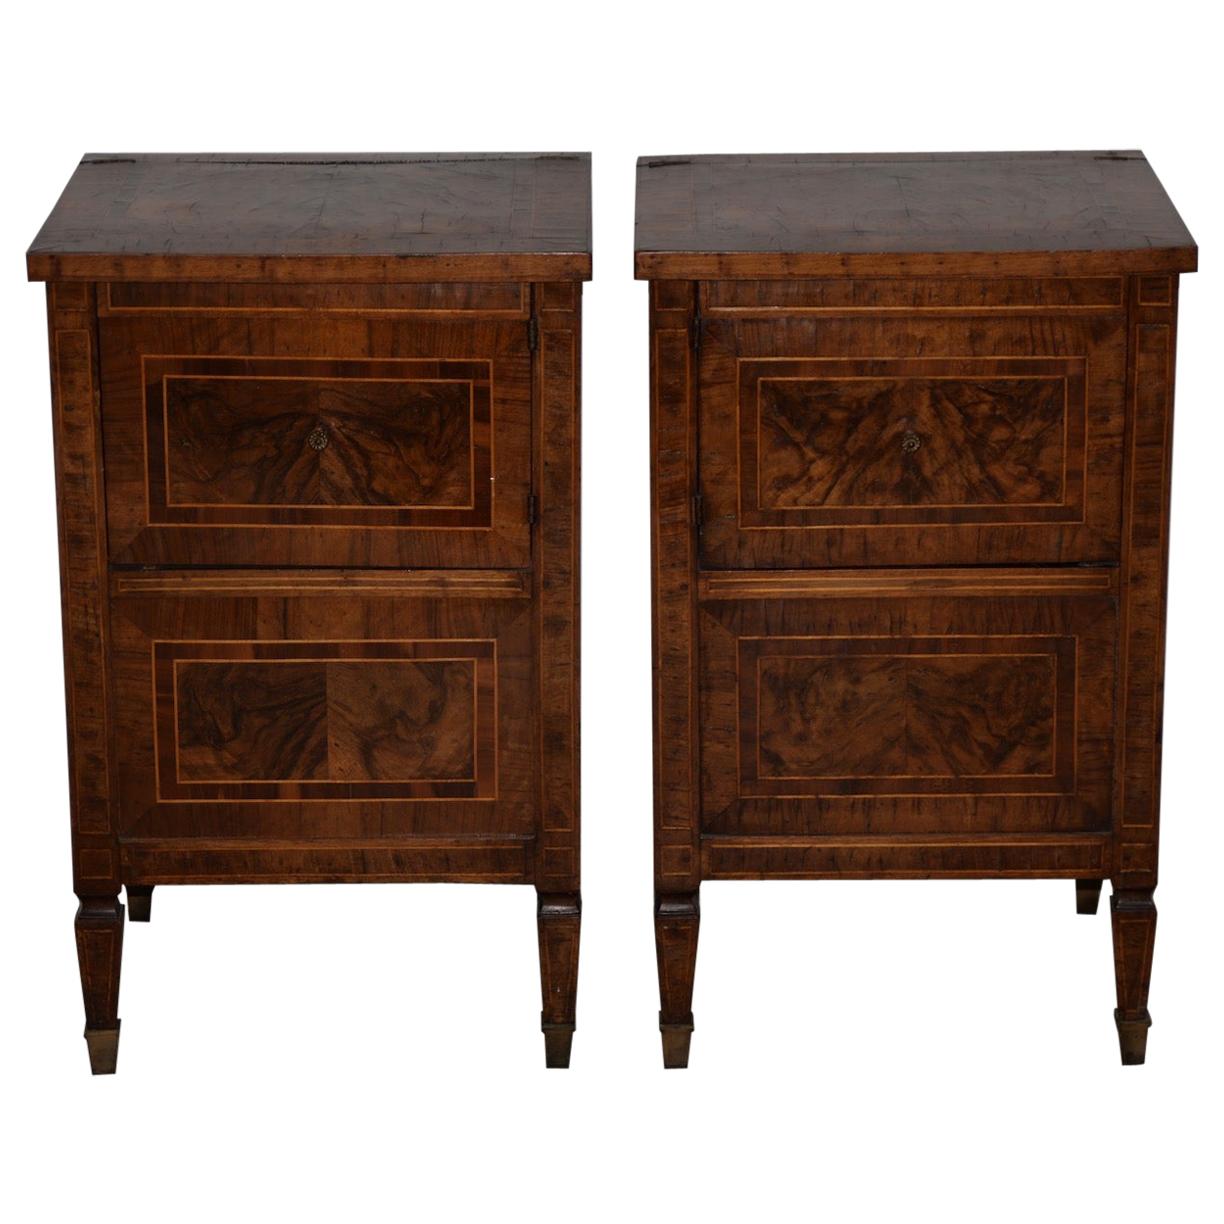 Pair of 19th Century Walnut Side Tables with Cabinets